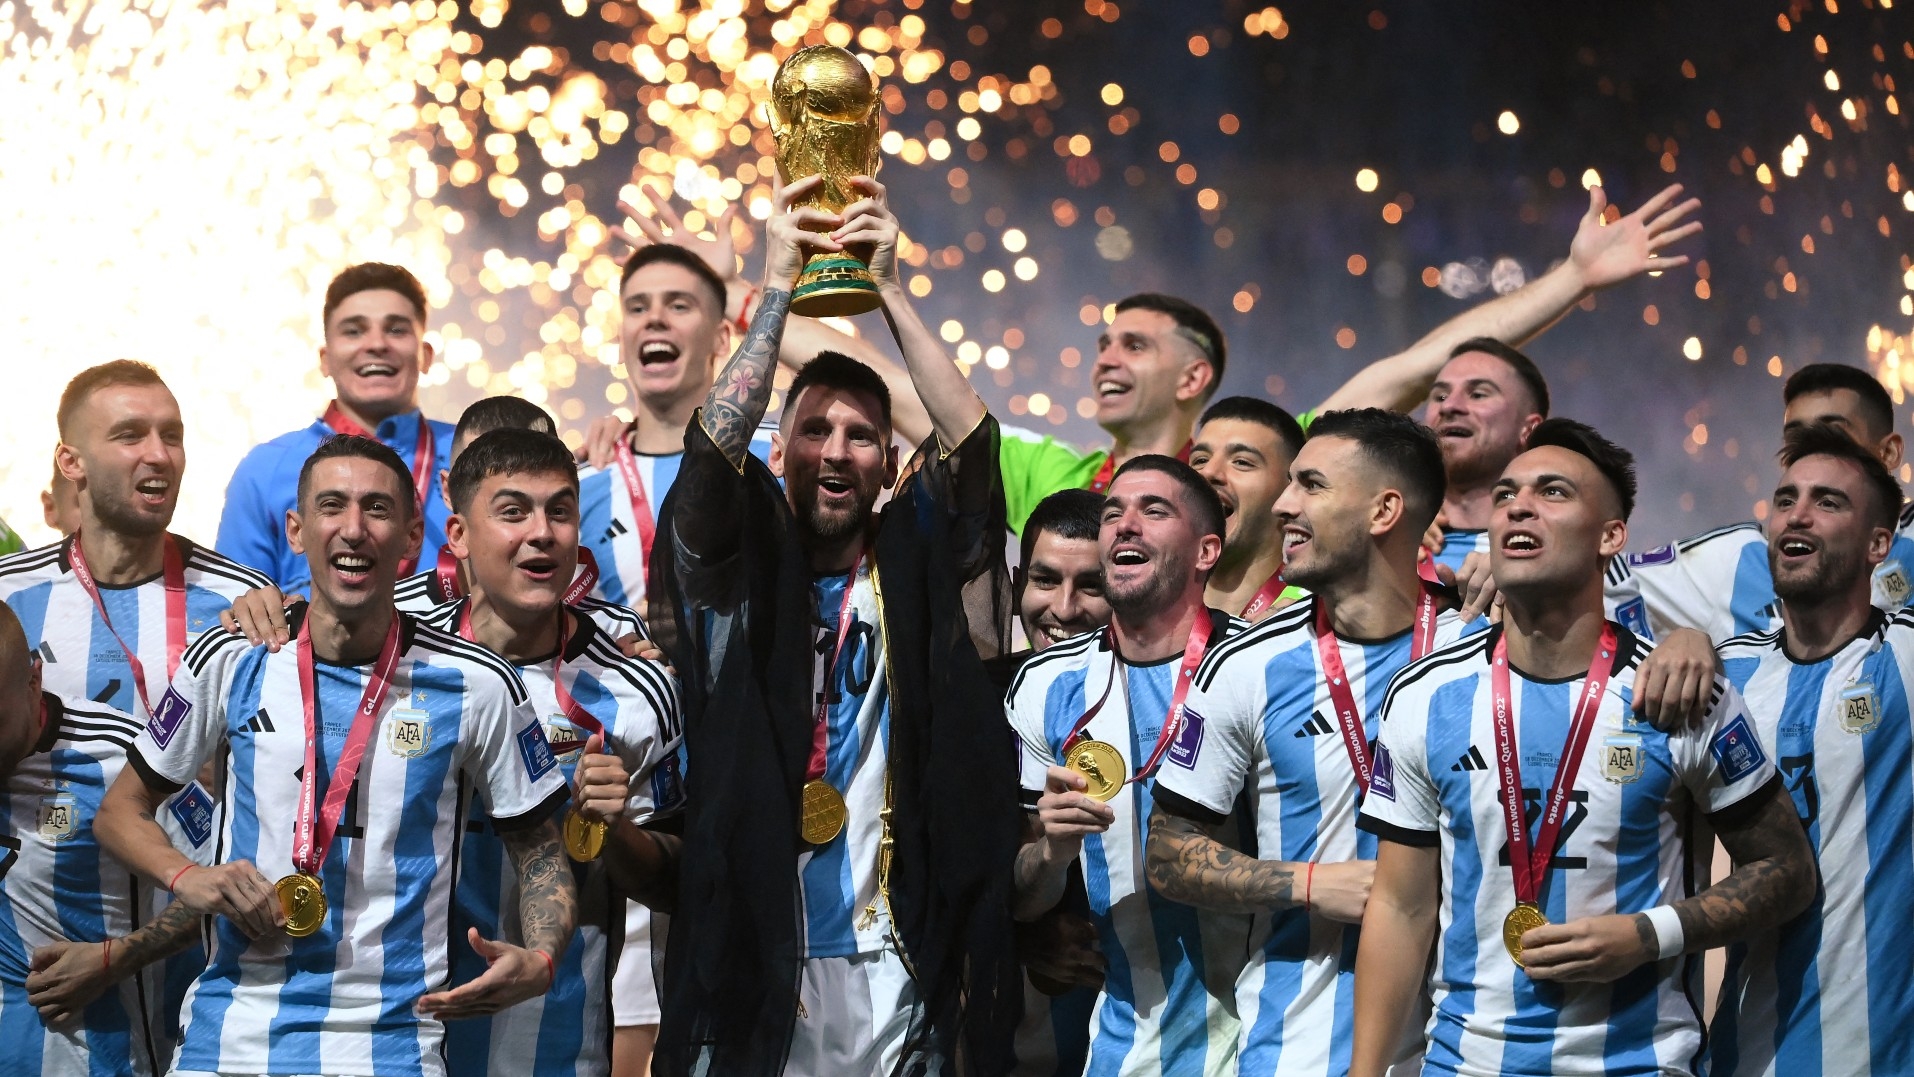 Lionel Messi lifts the World Cup trophy after Argentina defeat France at Lusail Stadium north of Doha, Qatar on 18 December 2022